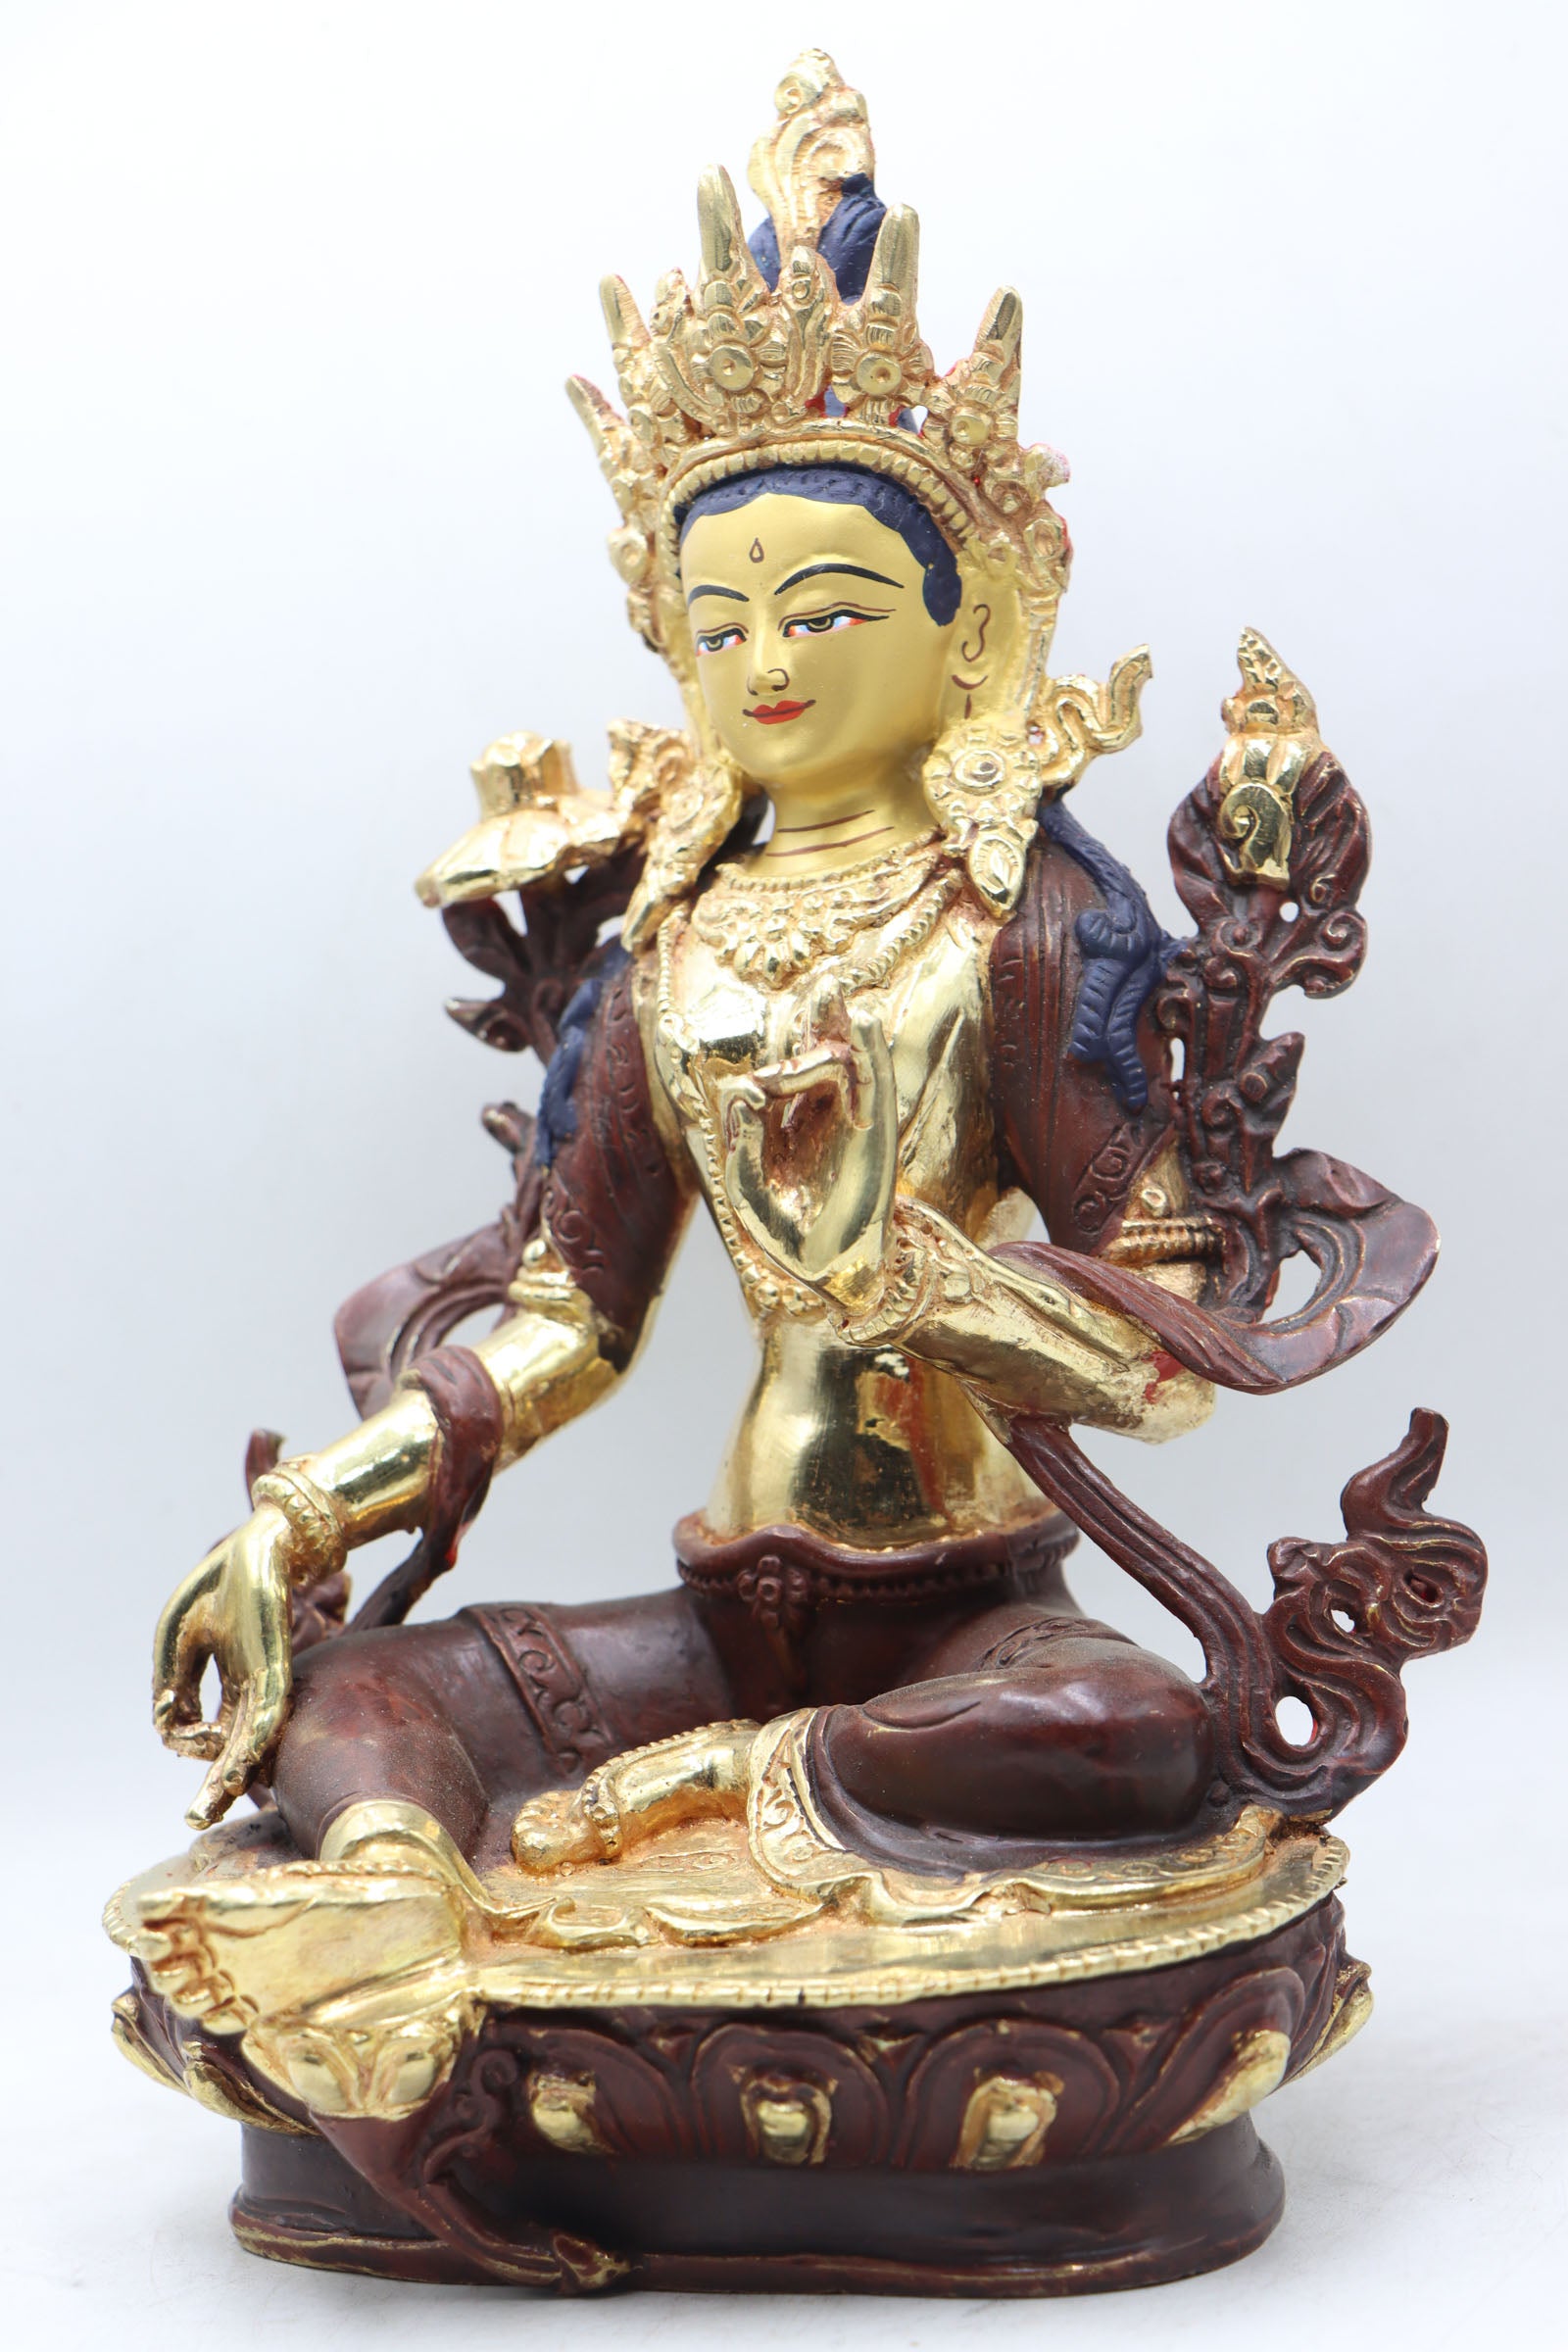 Green Tara Statue is associated with qualities such as compassion, healing, protection, and the swift removal of obstacles.